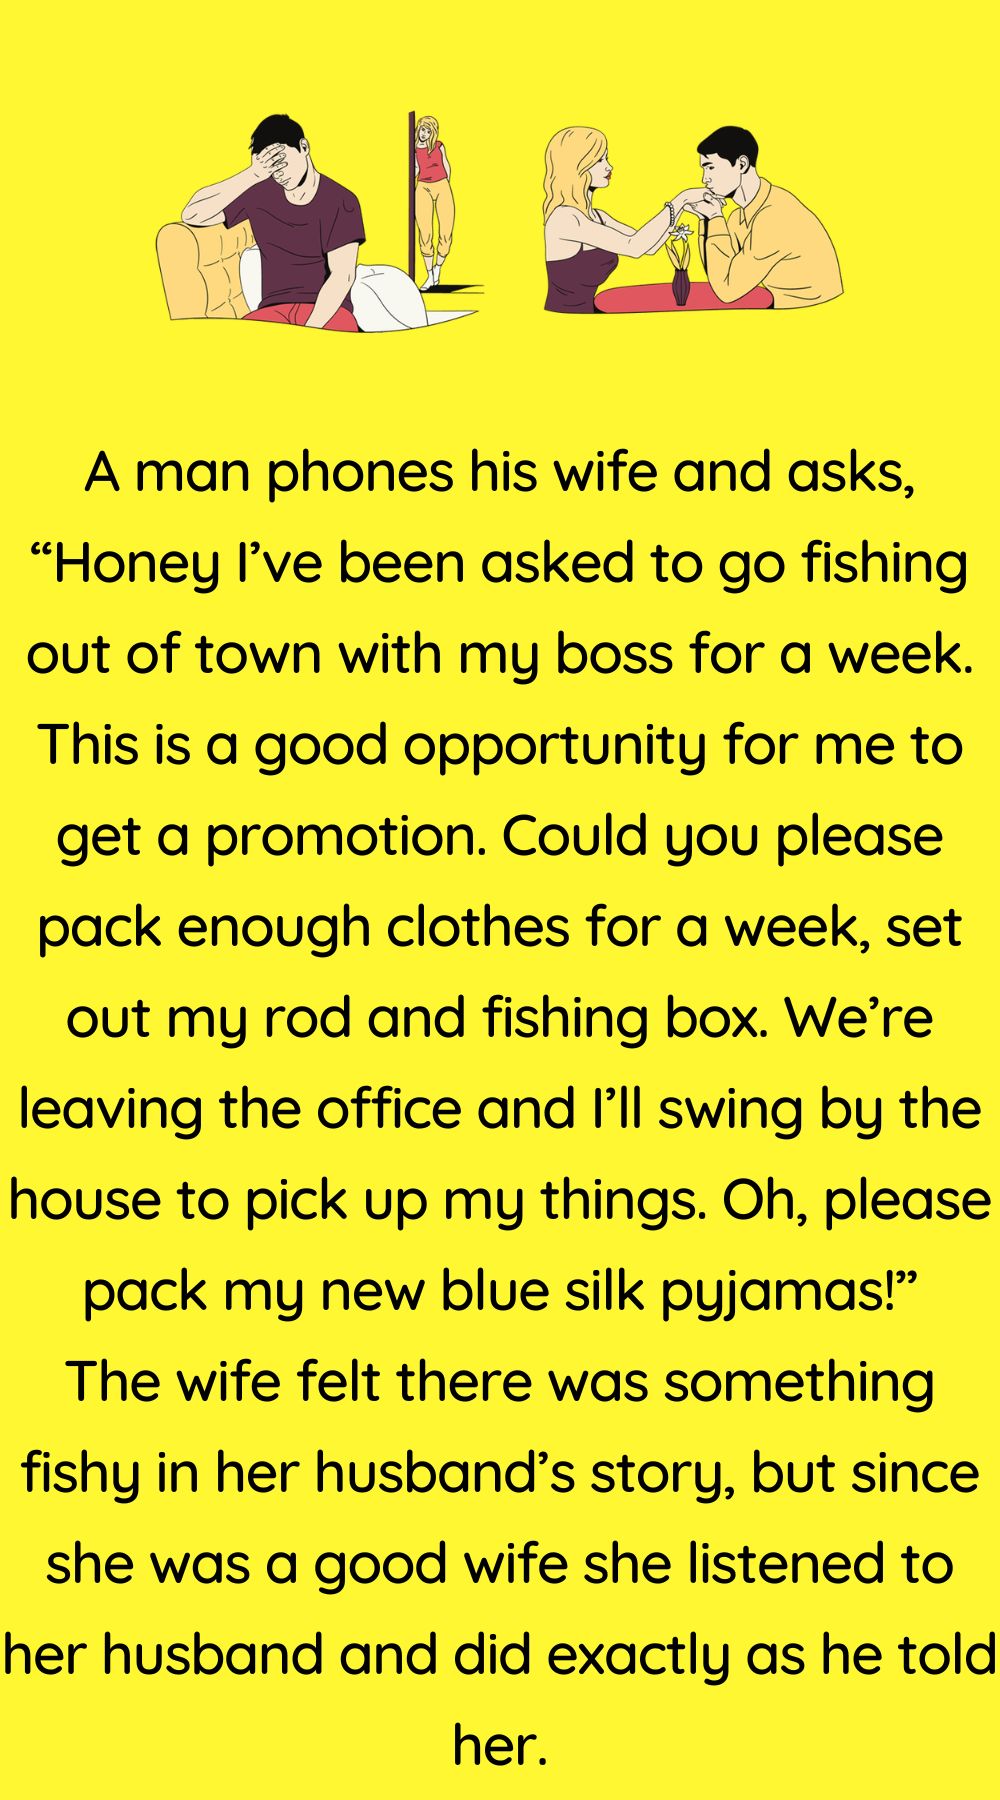 A man phones his wife and asks